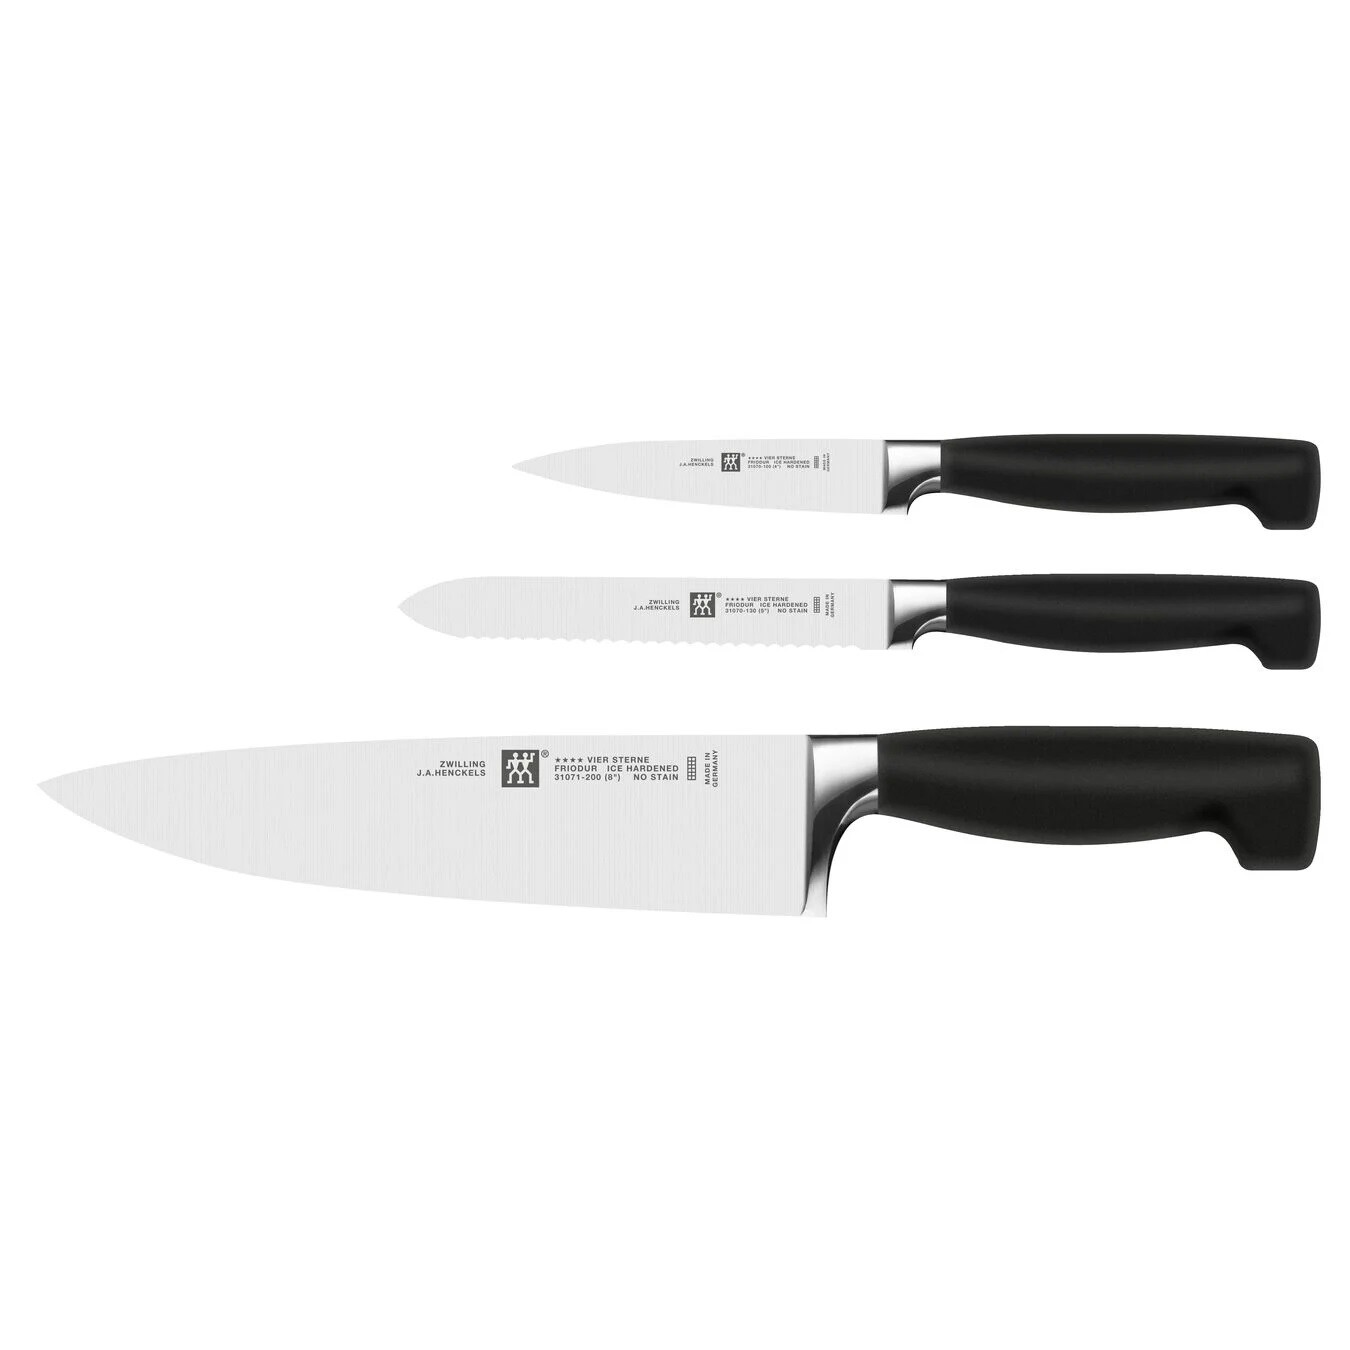 ZWILLING 'four star' 3-delige messenset PROMO 189 -25%